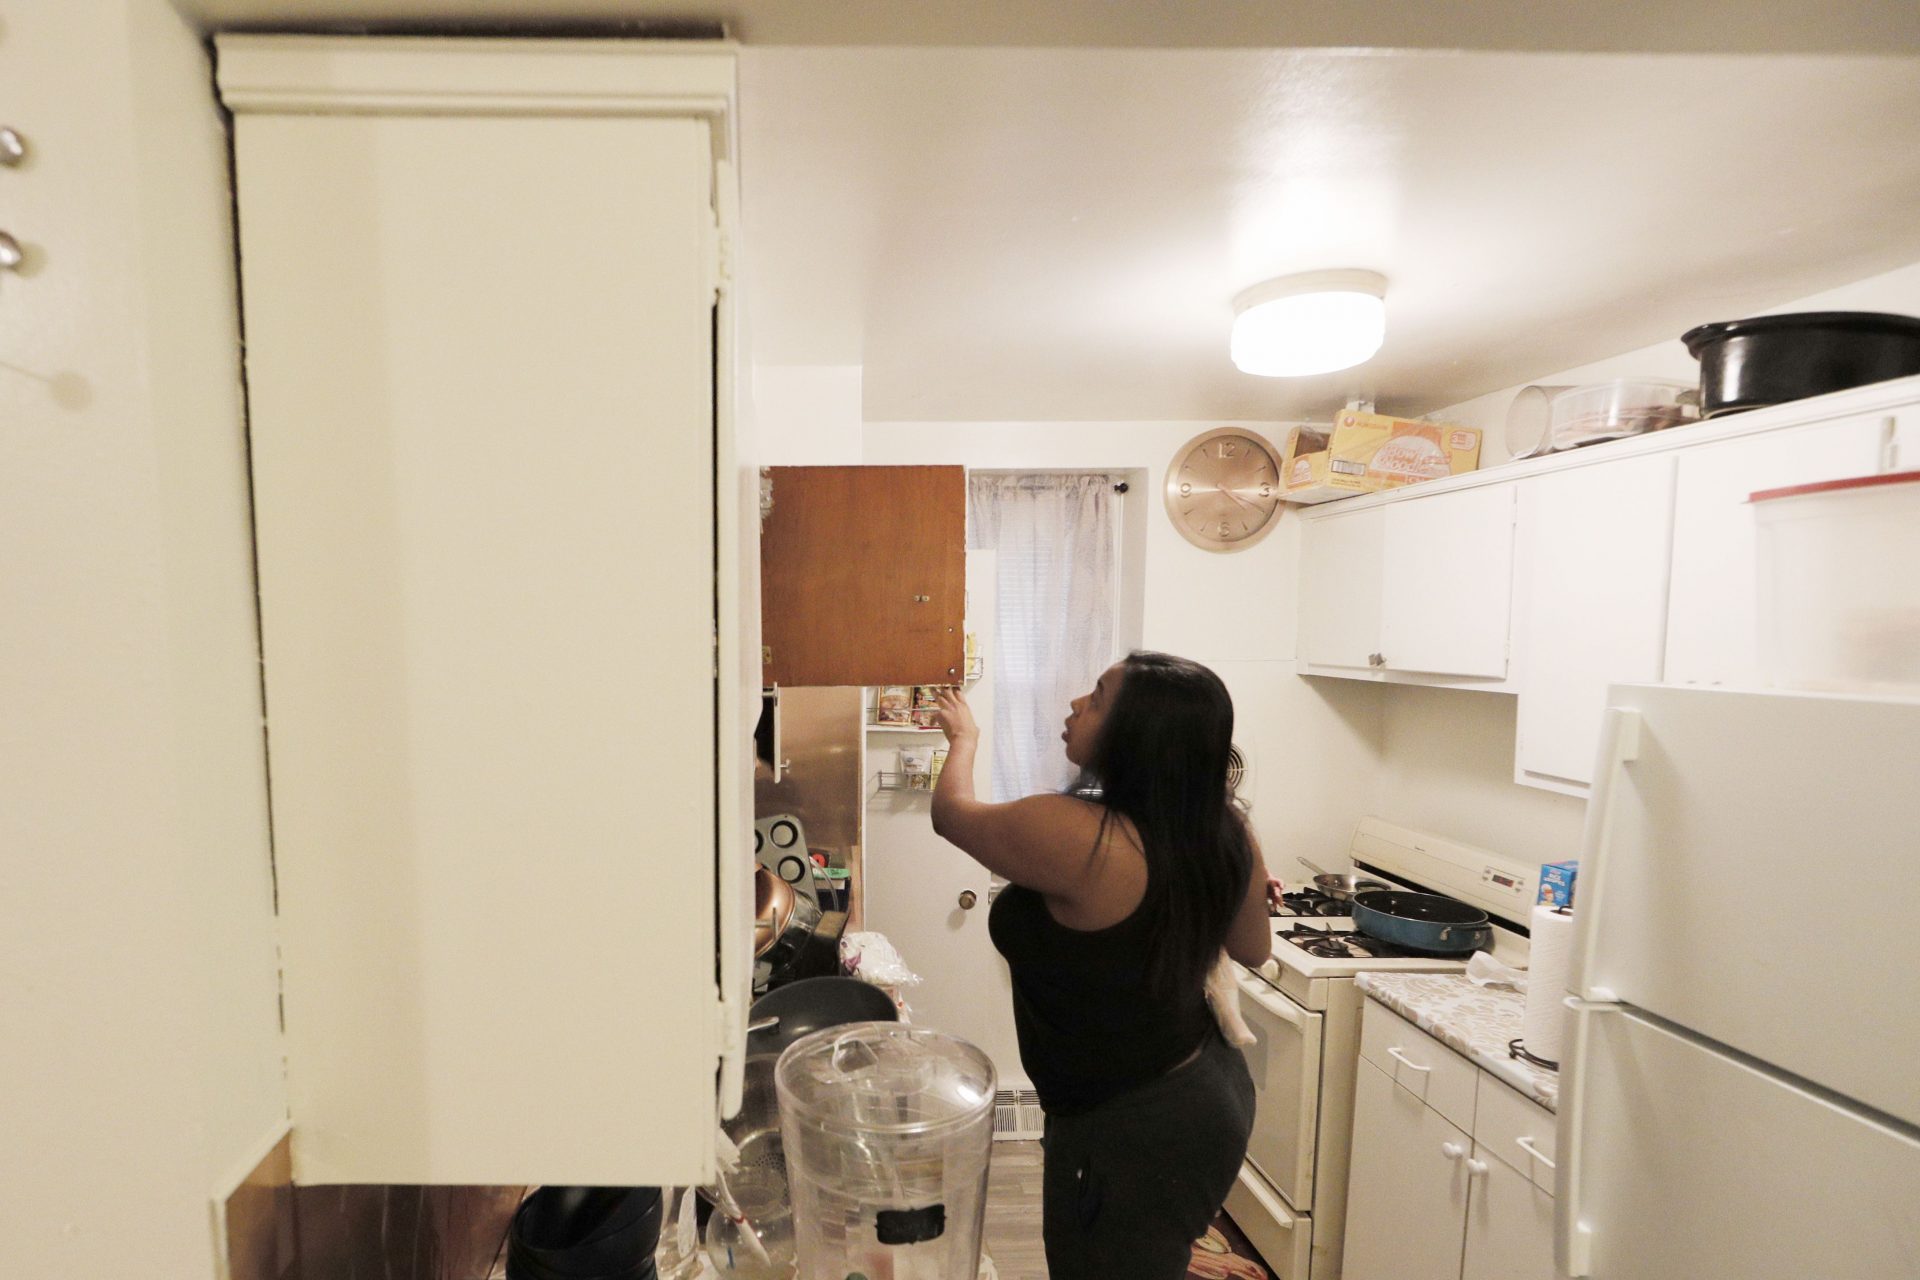 Now, with an eviction on her record, Jasmine Pennington is moving her things to a friend’s house and scrambling to find somewhere else for her family to live before Nov. 9, when Philadelphia will resume lockouts.